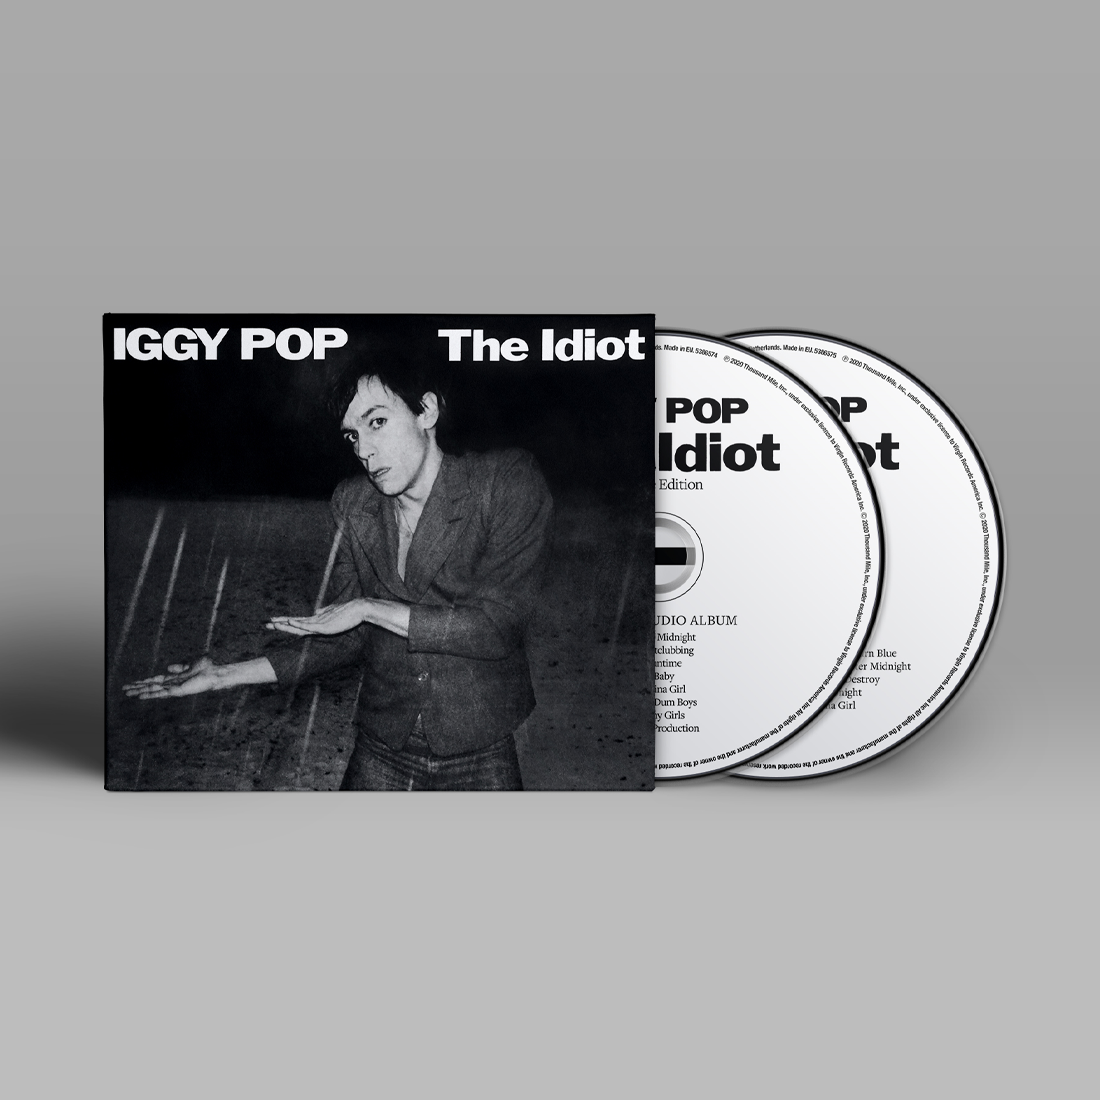 Iggy Pop - The Idiot: Deluxe 2CD (Remastered)